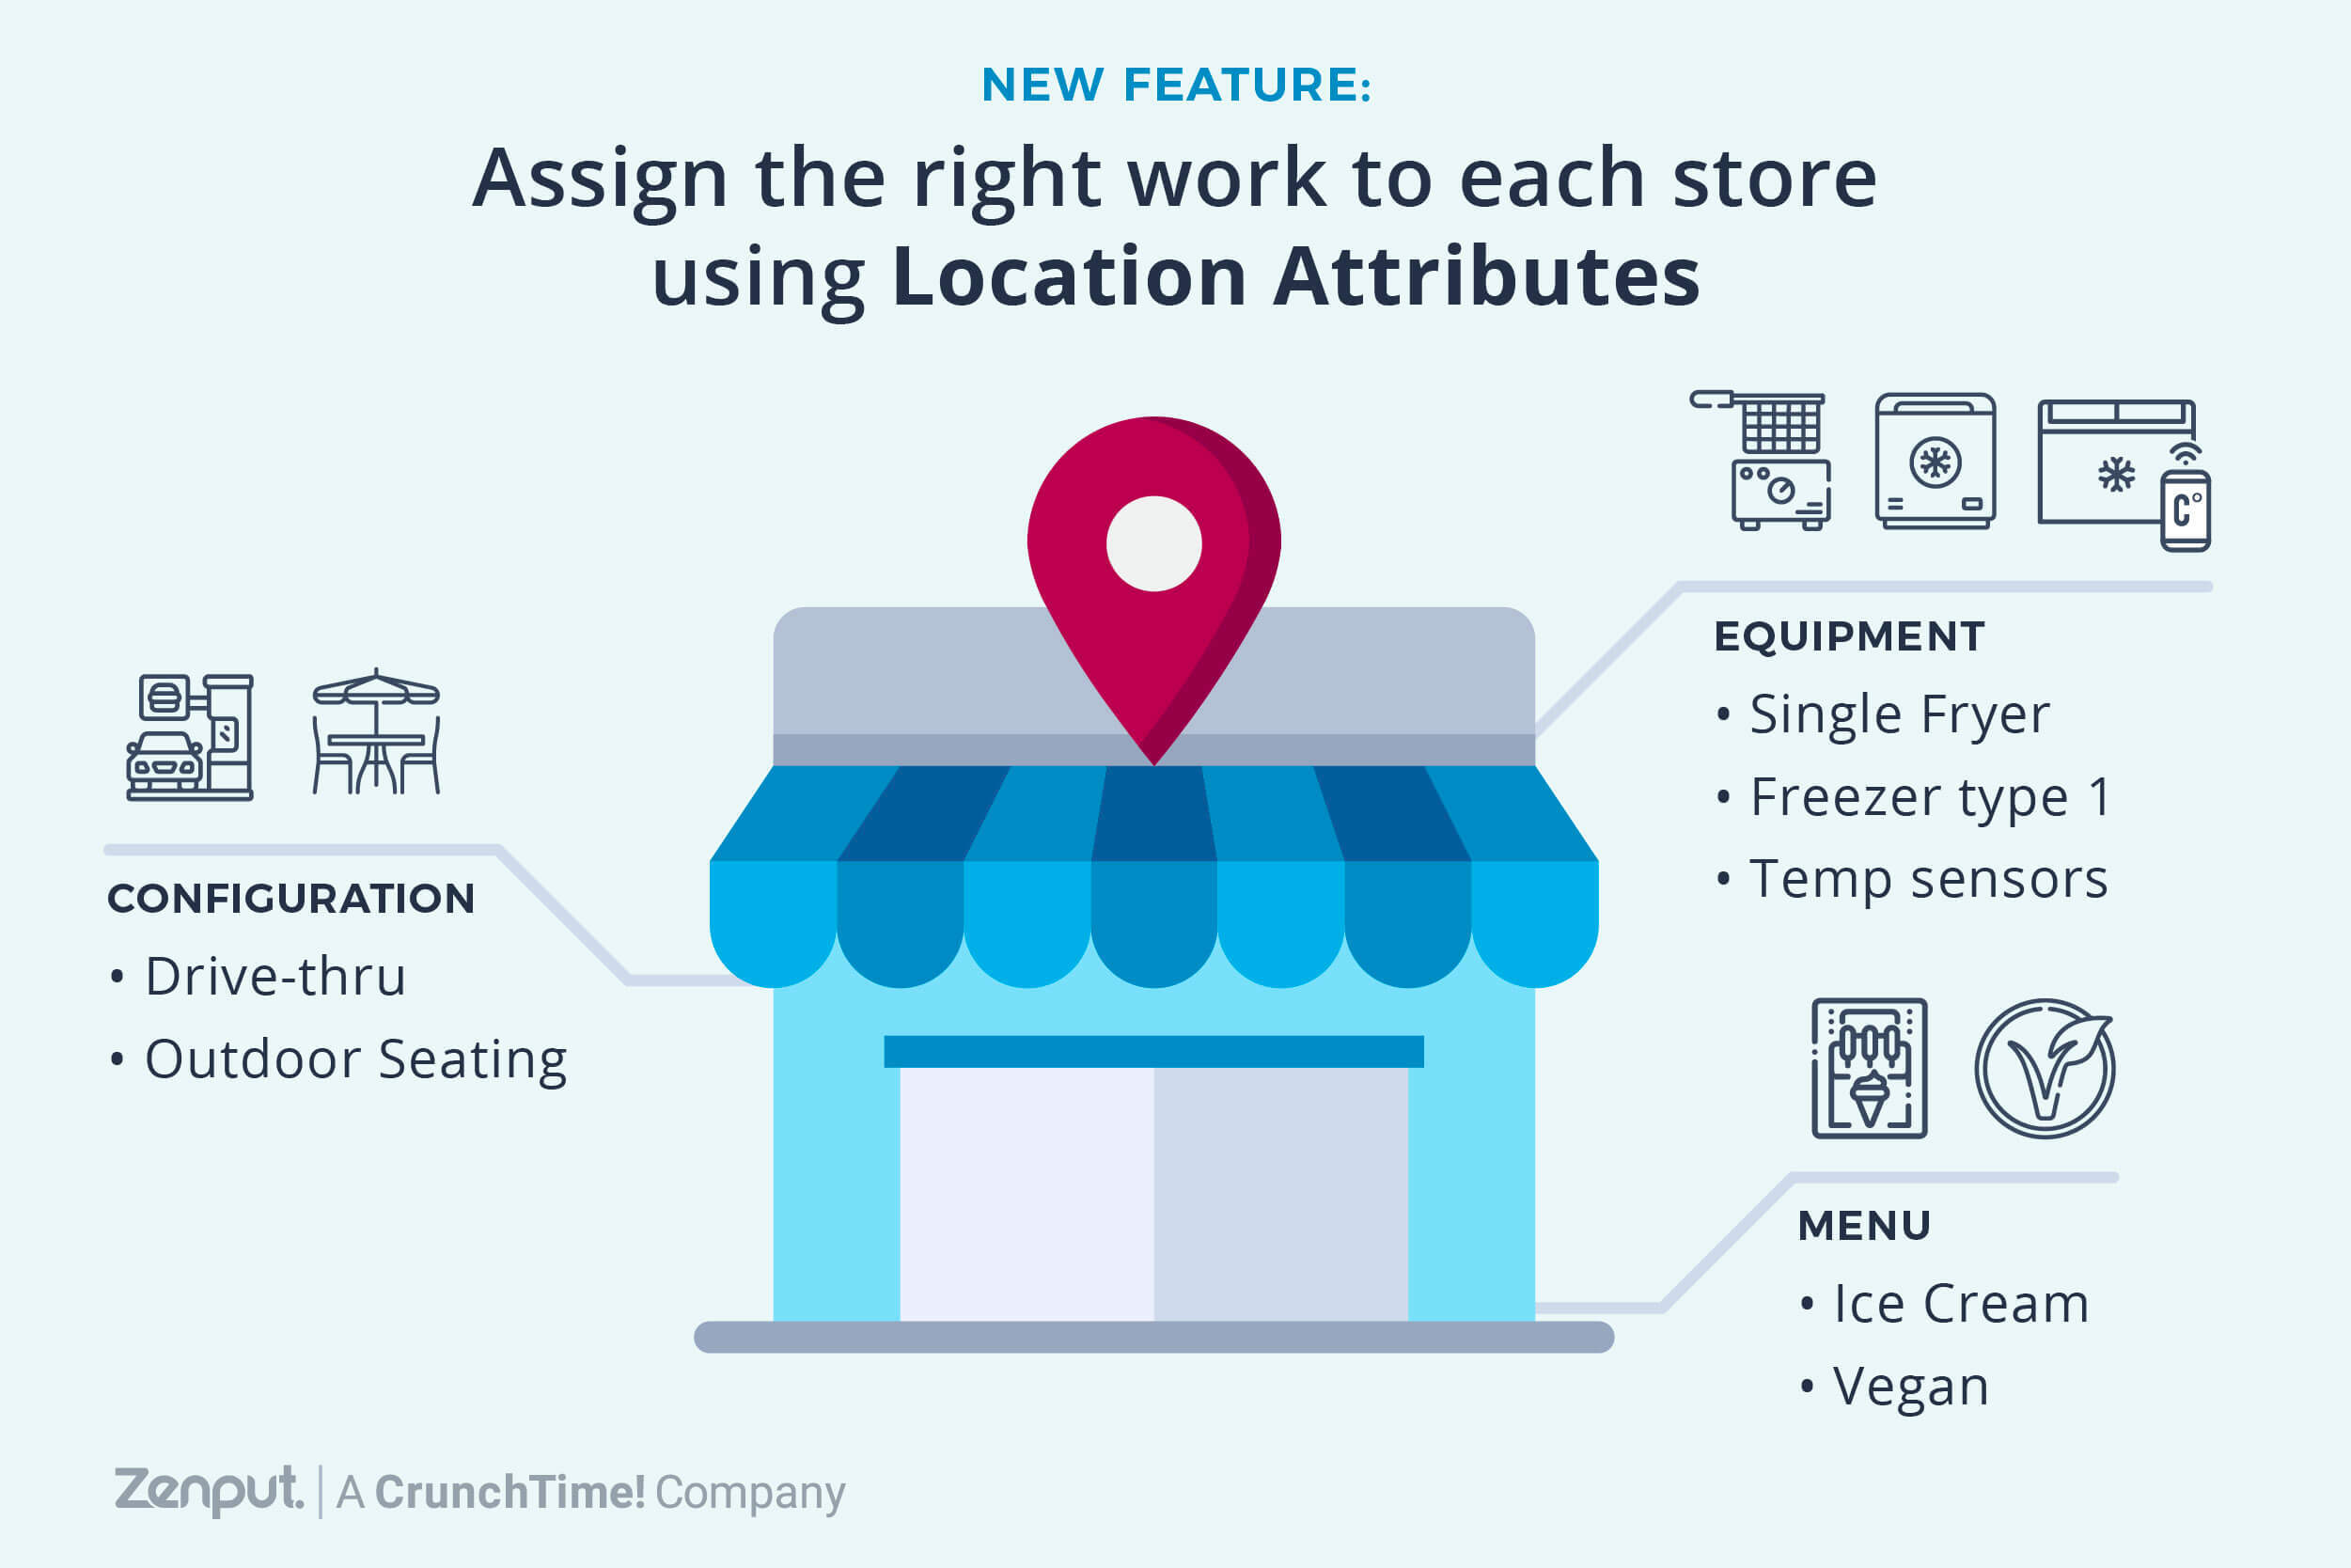 new Zenput feature: Location Attributes to drive and assign work to each store